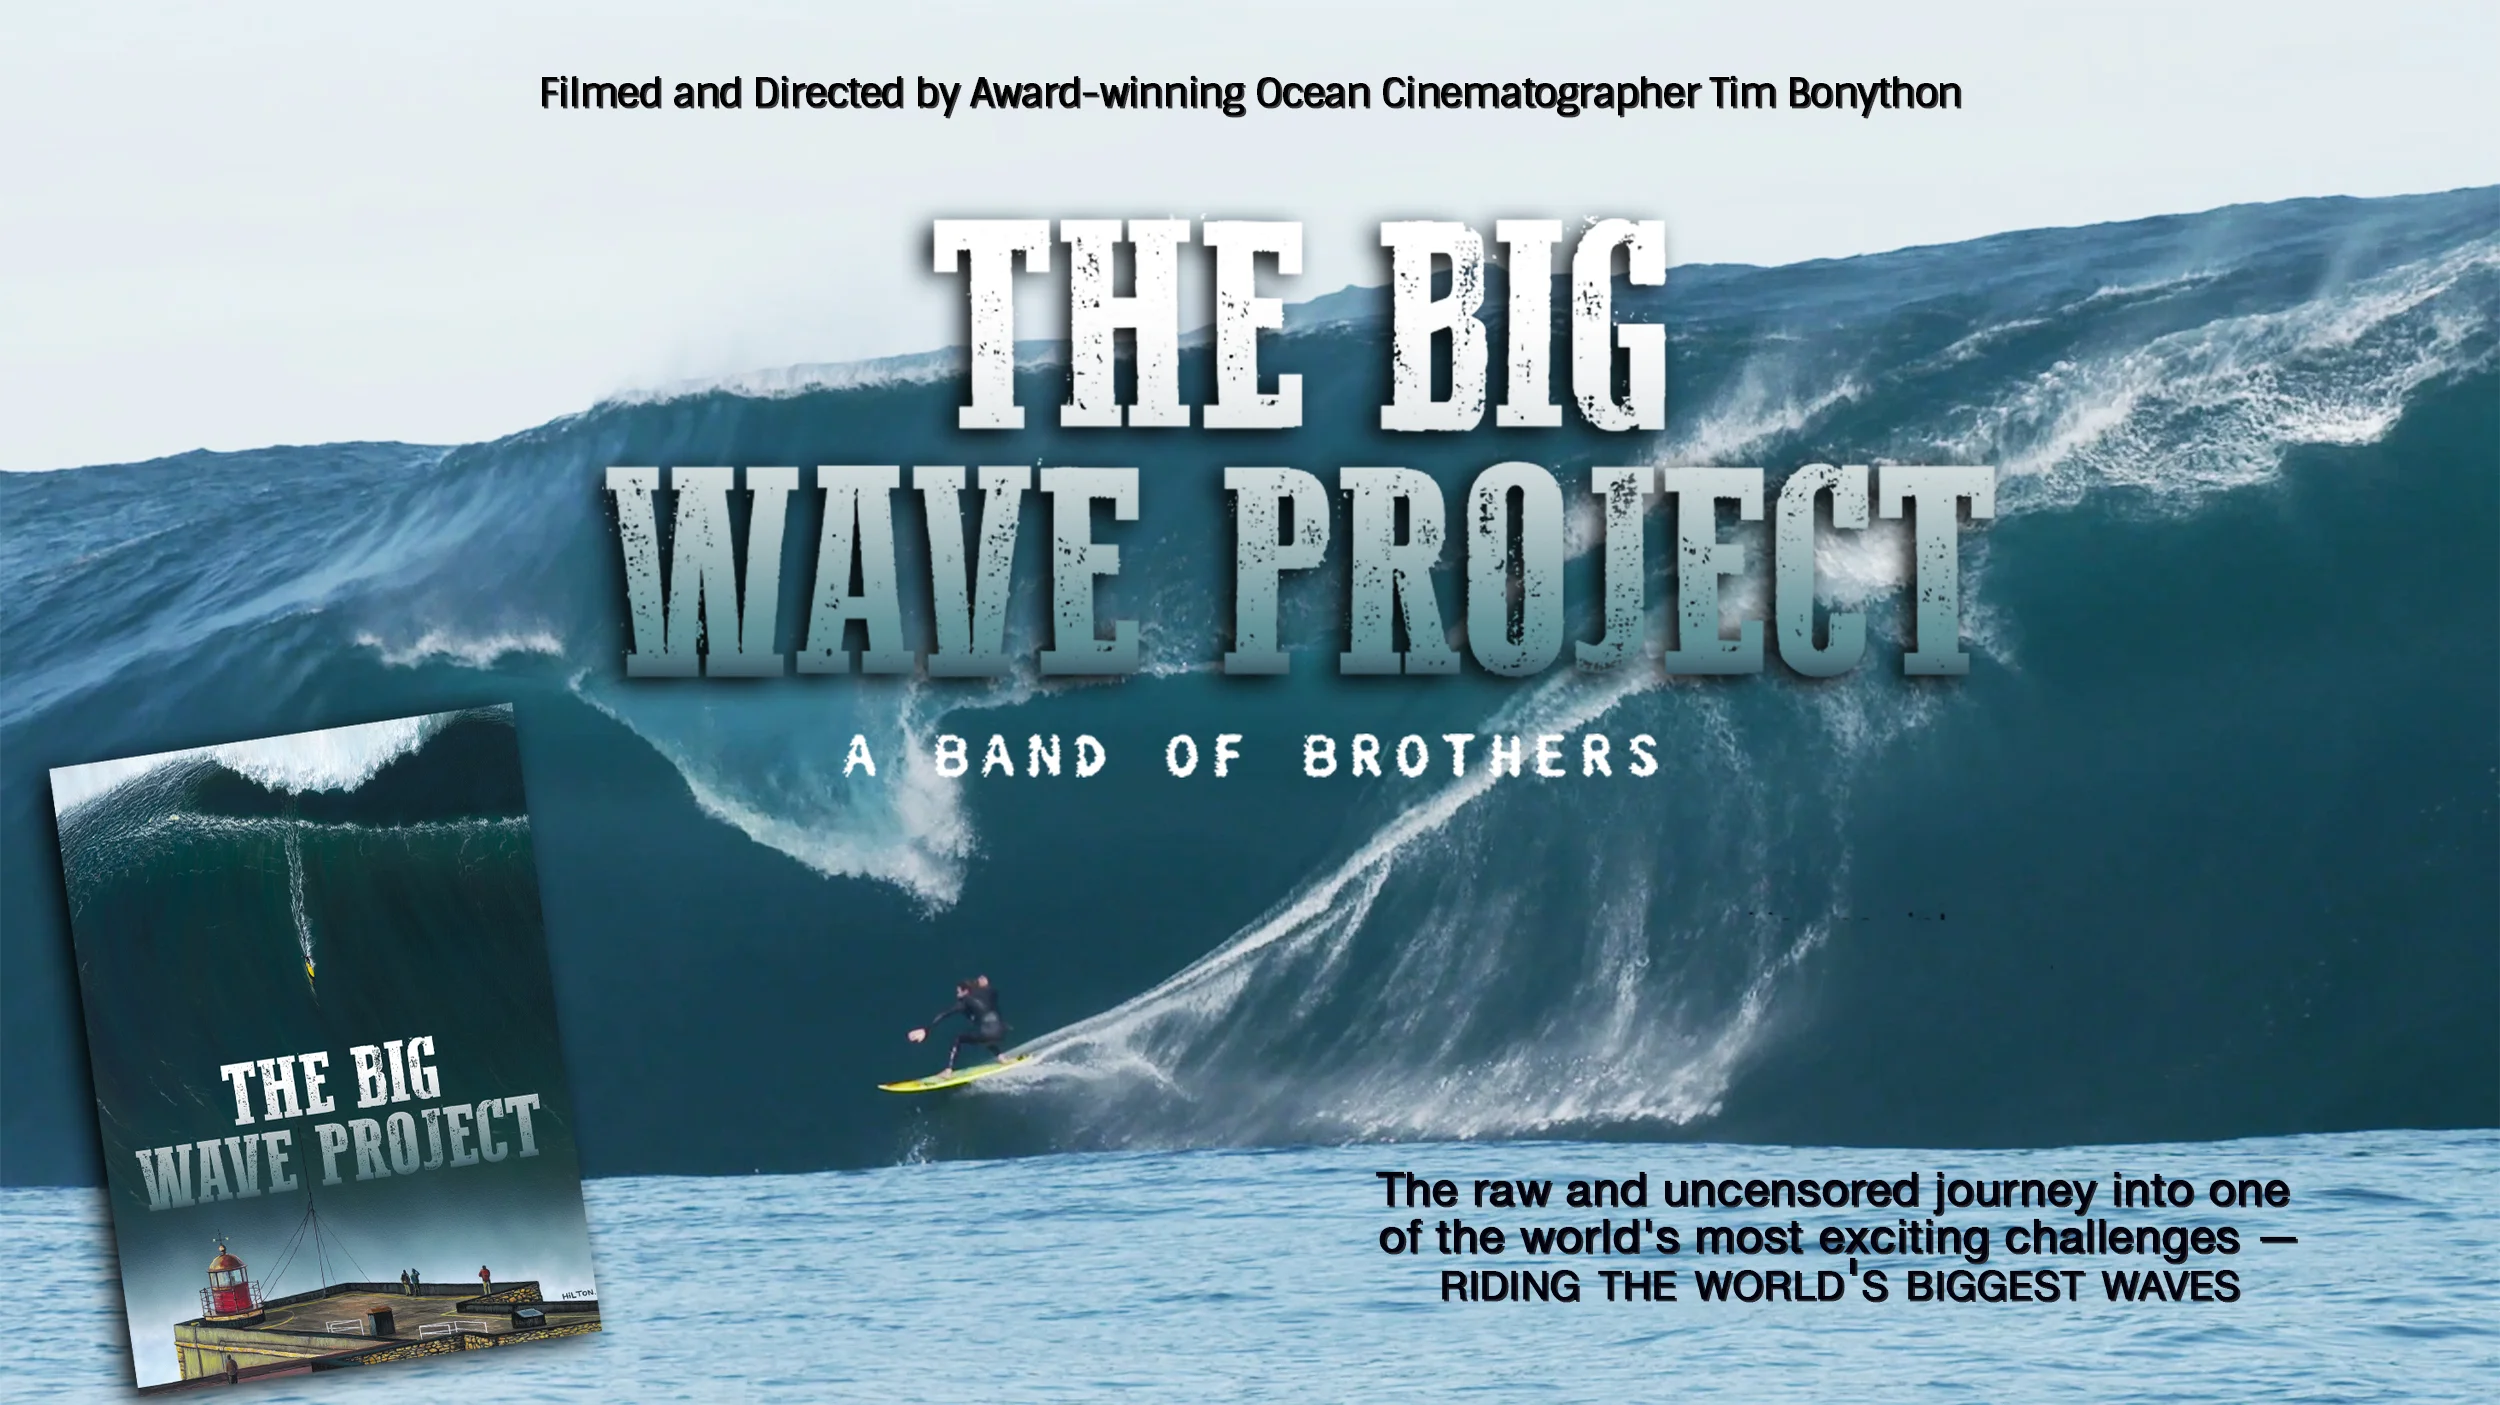 Watch THE BIG WAVE PROJECT by Tim Bonython Online | Vimeo On Demand